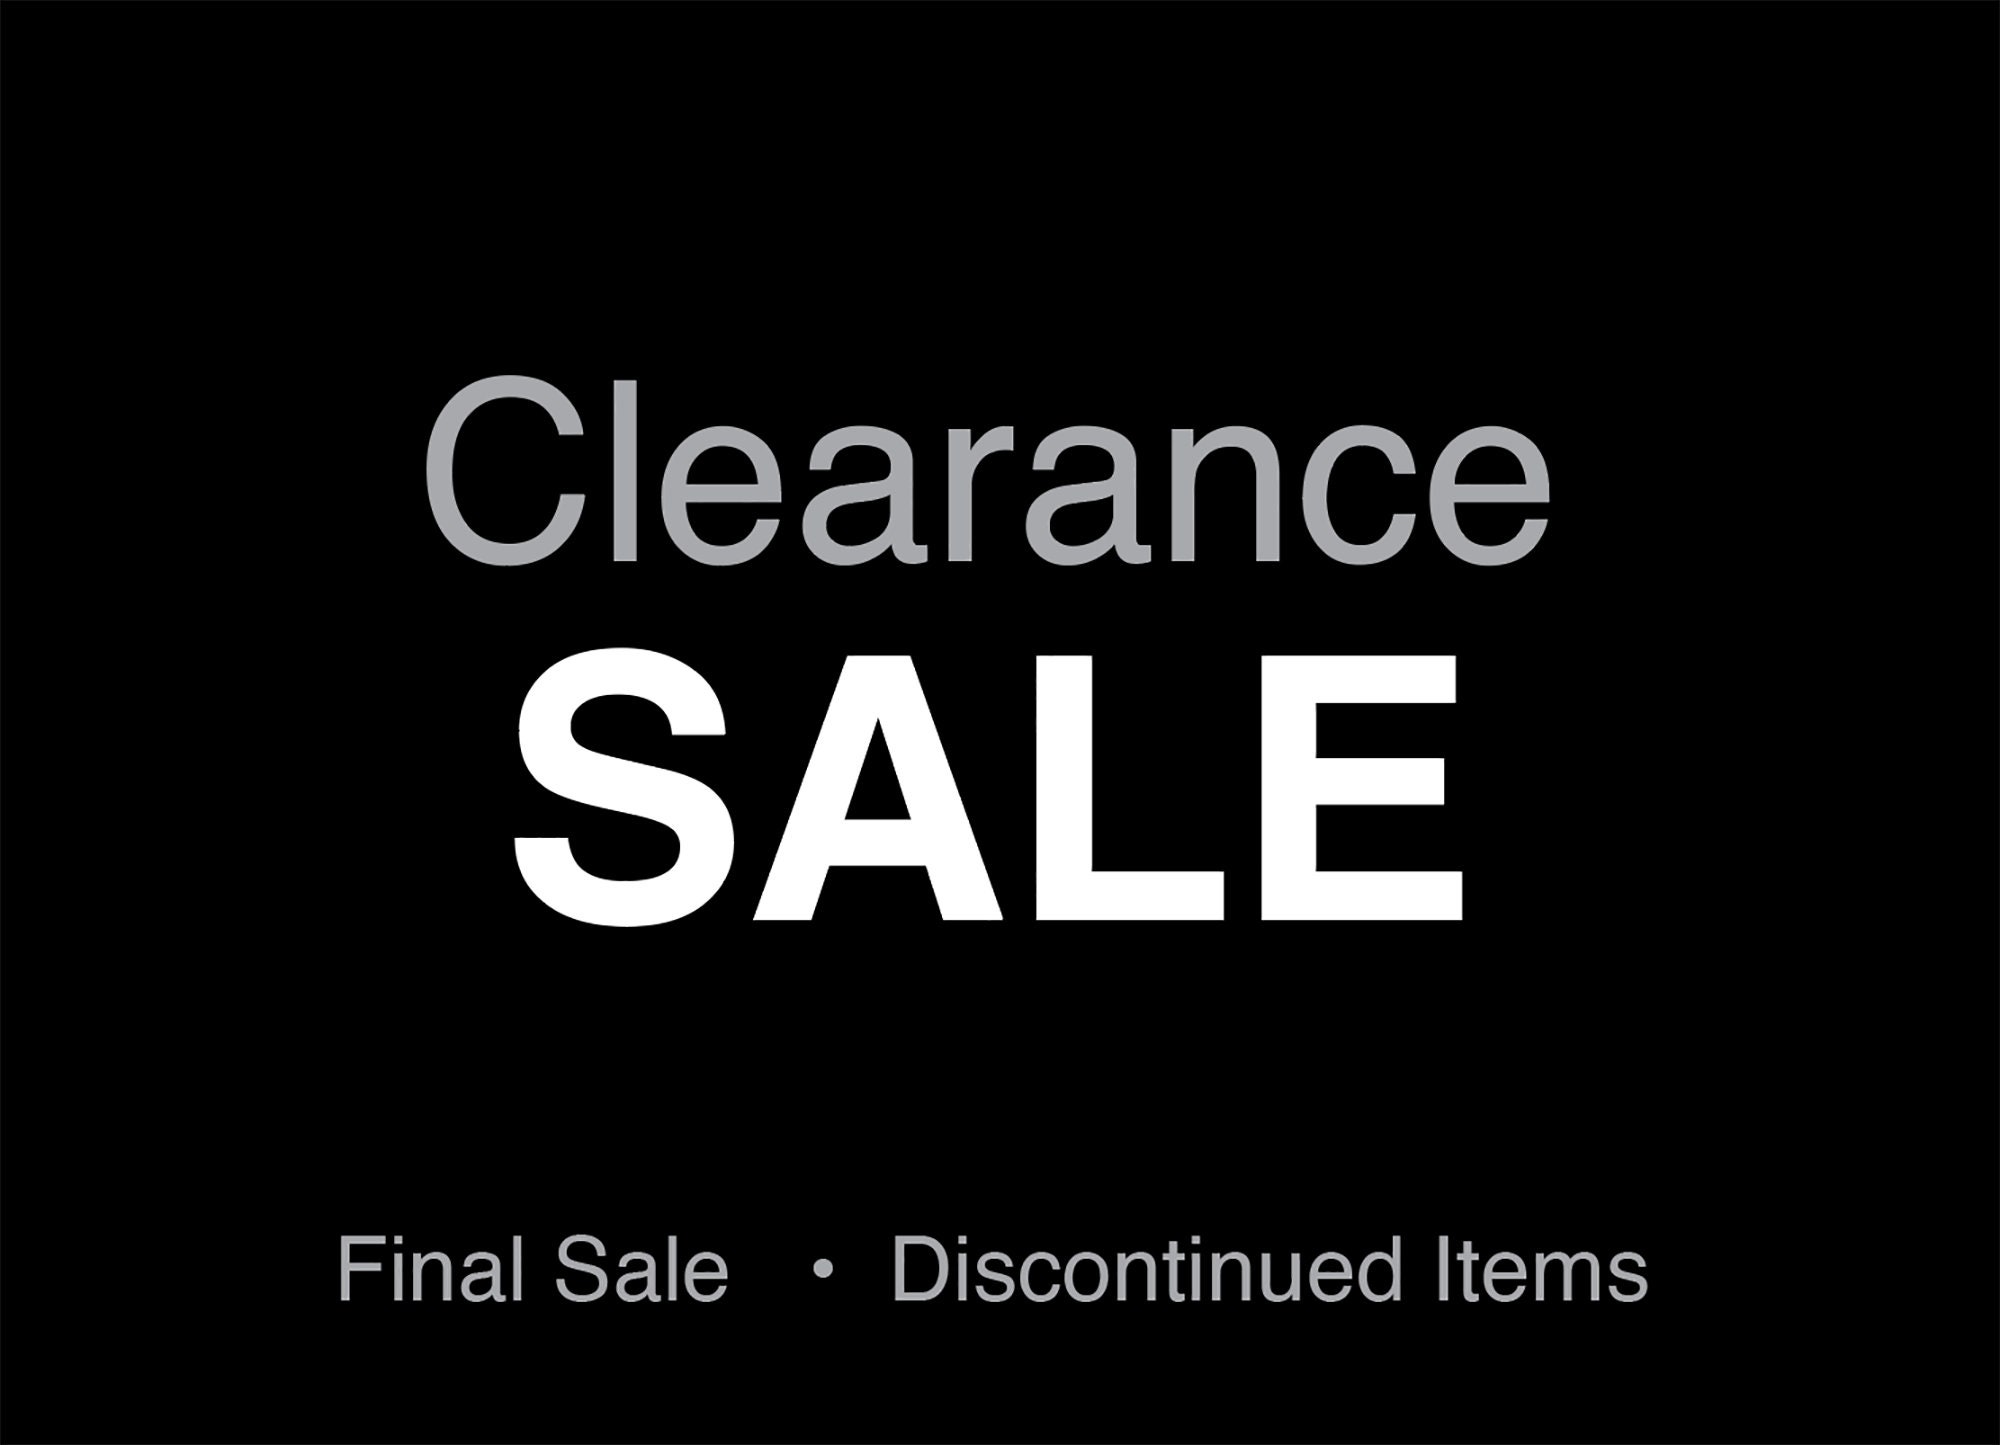 Deals, Sale & Clearance Items